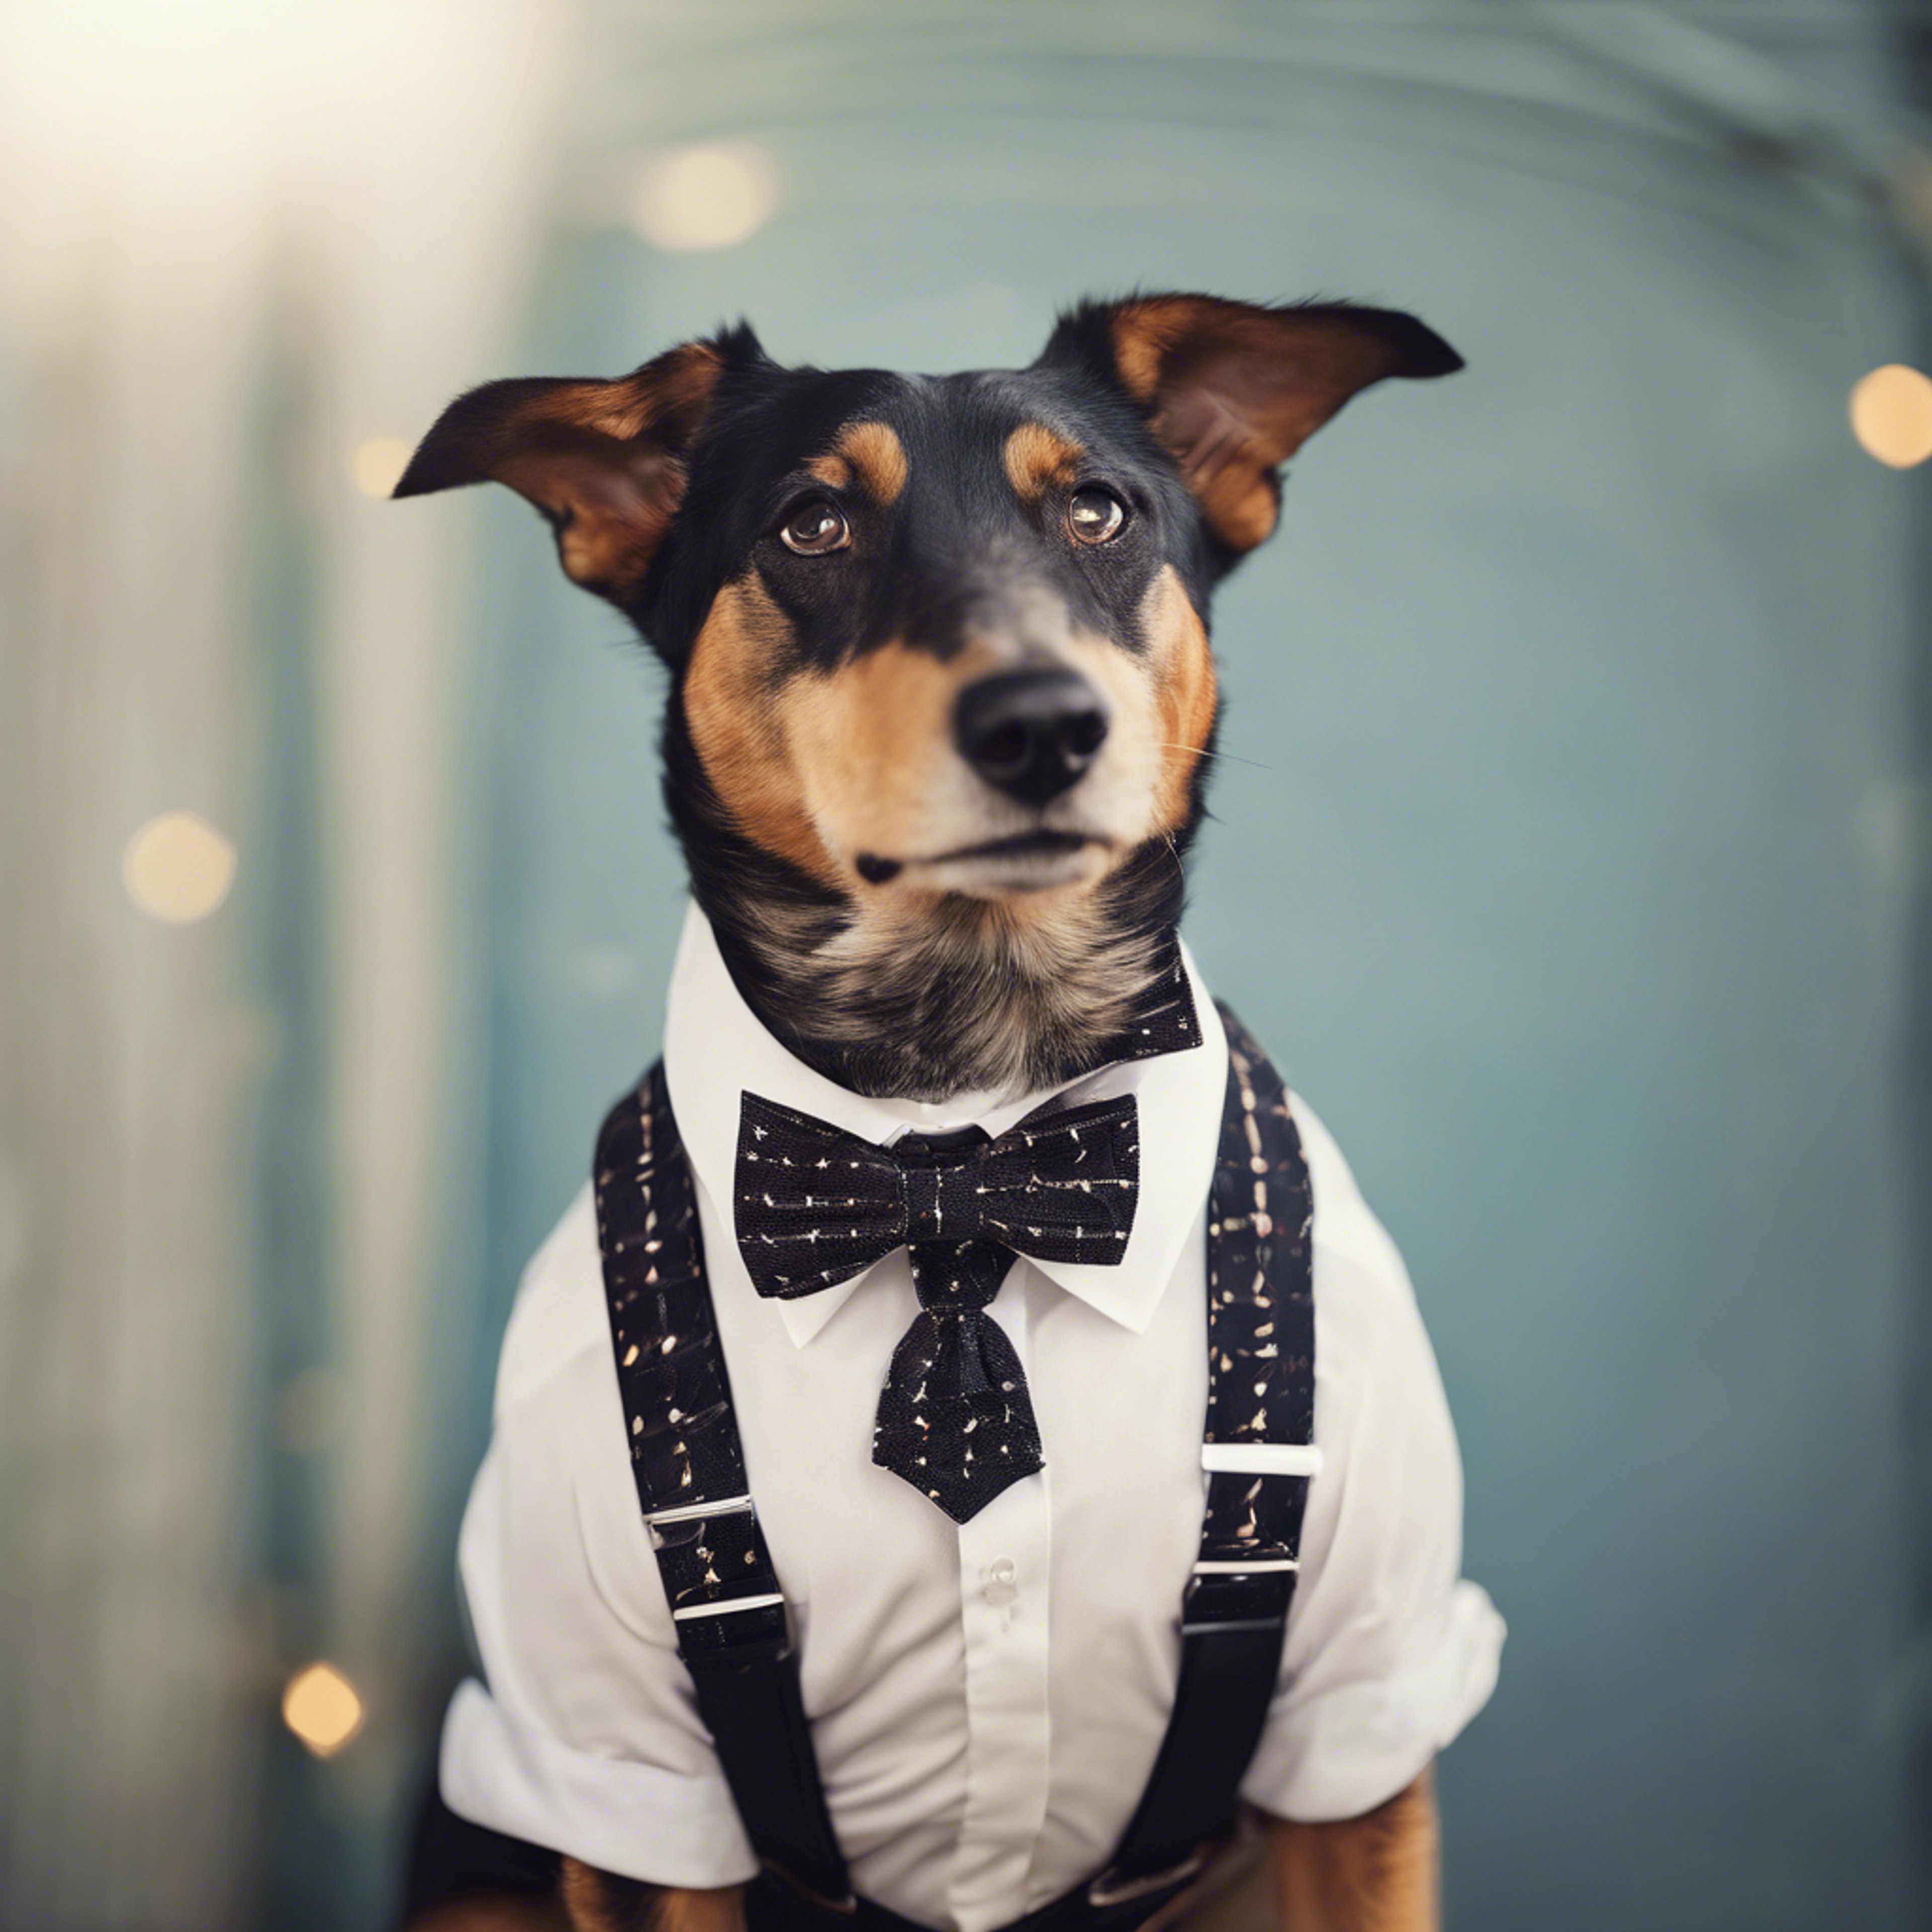 A dapper dog dressed in a cute retro-style outfit, featuring suspenders and bow tie. Behang[69a1531fb80543609416]